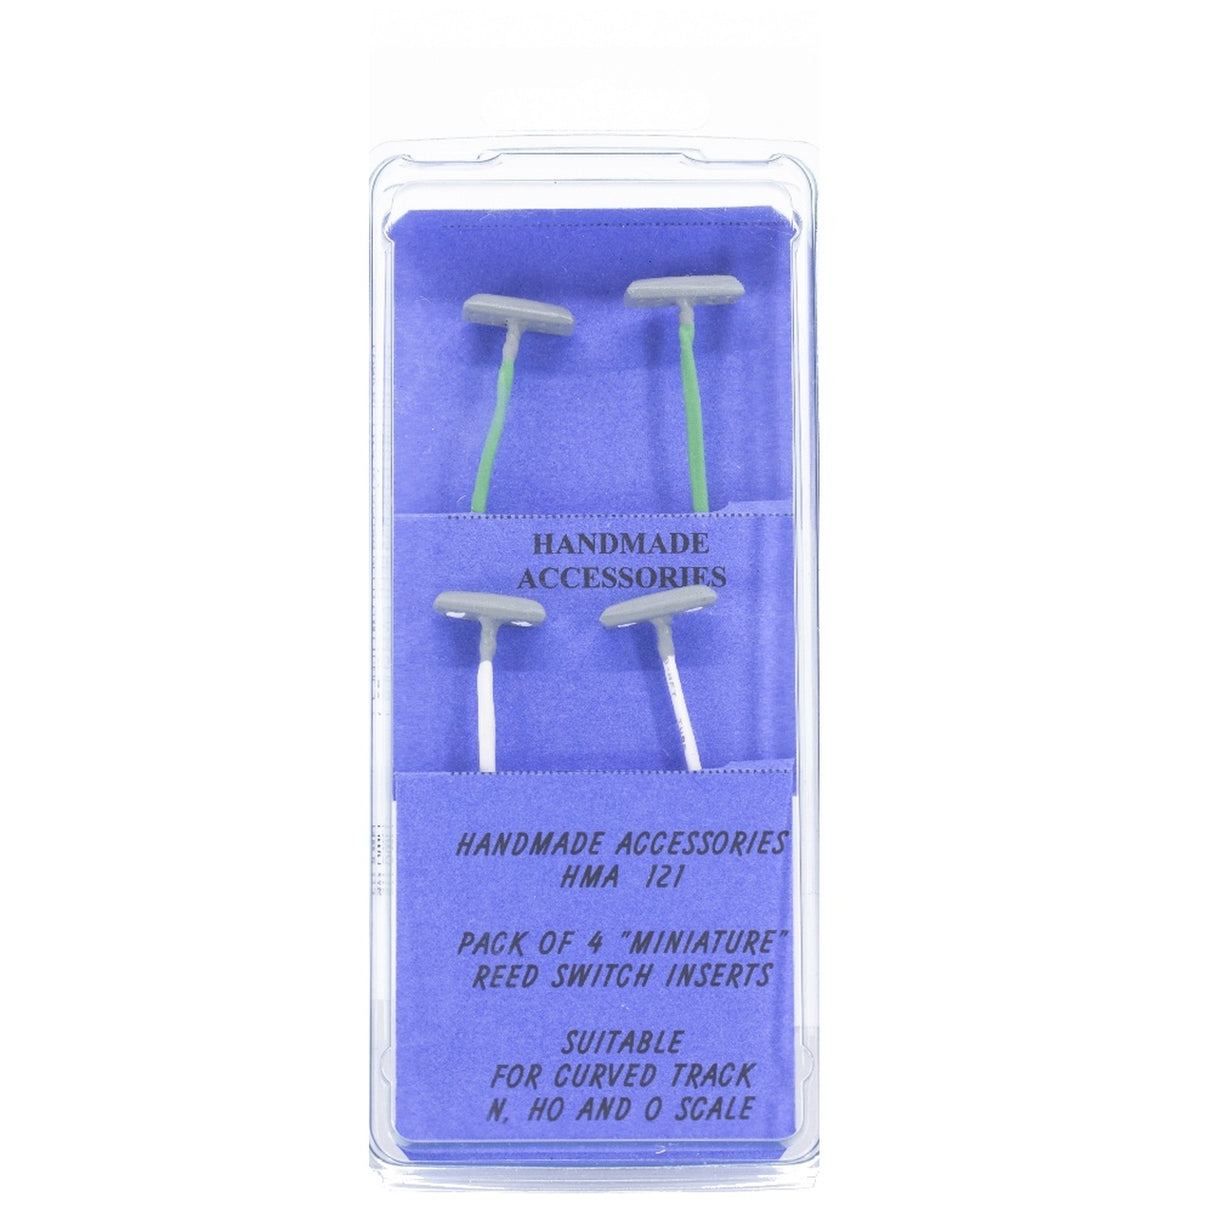 HMA 121 New Mini Reed Switch Insert Pack of 4 Hand Made Accessories TRAINS - HO/OO SCALE